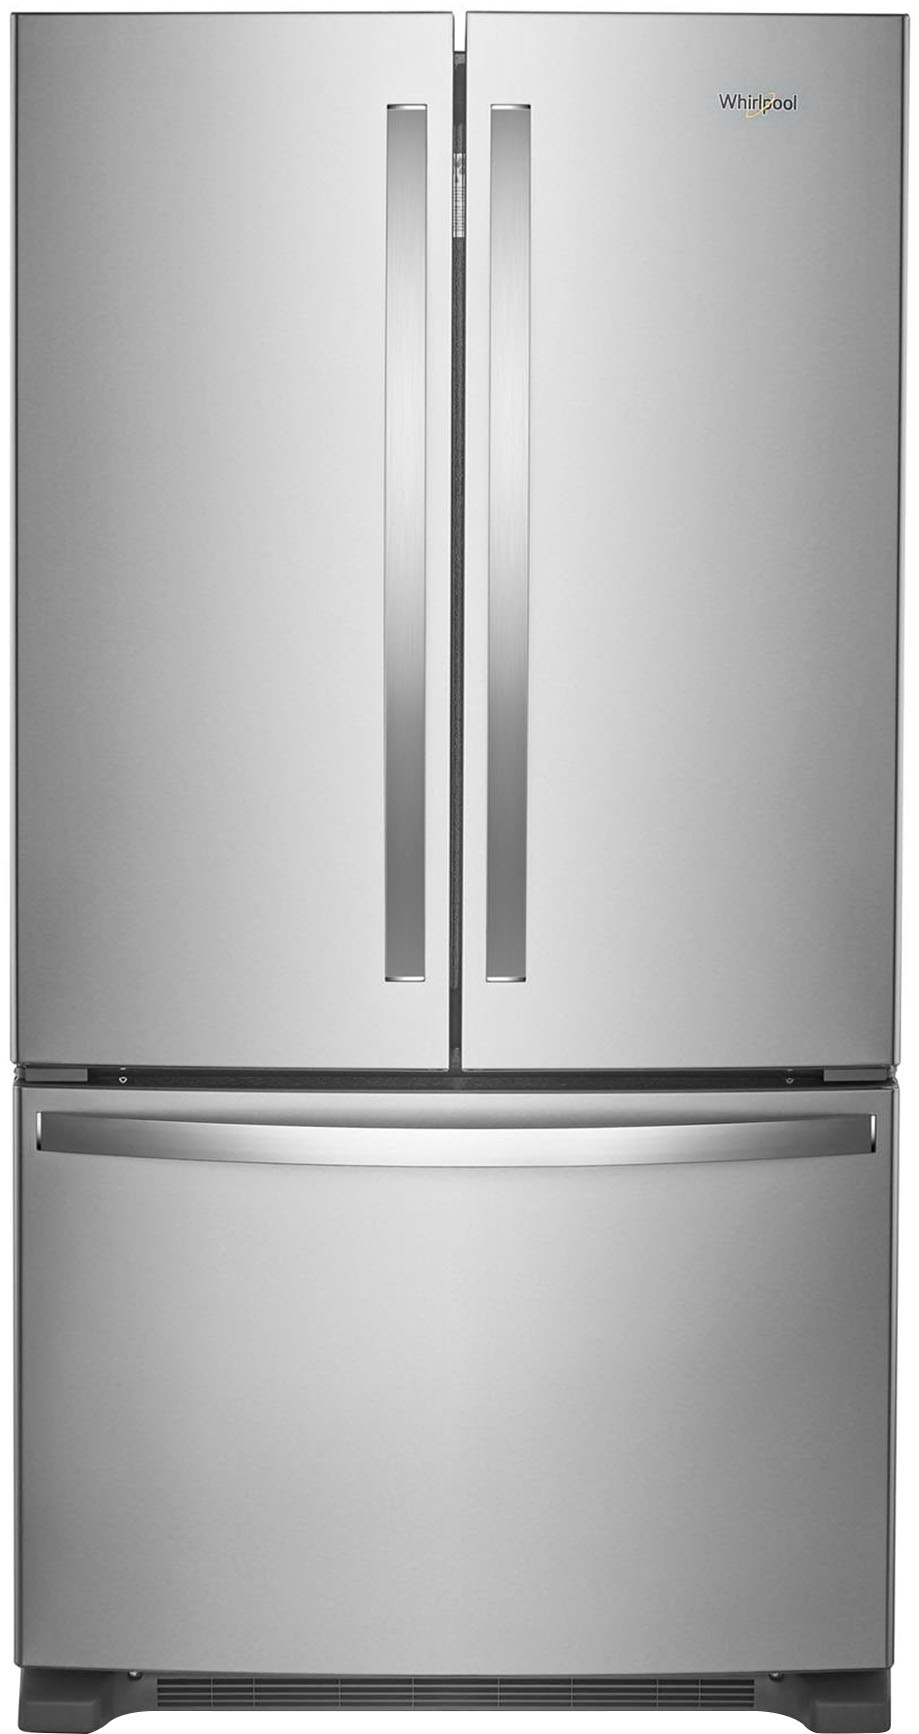 Whirlpool 25 2 Cu Ft French Door, Whirlpool Refrigerator Replacement Shelves And Drawers